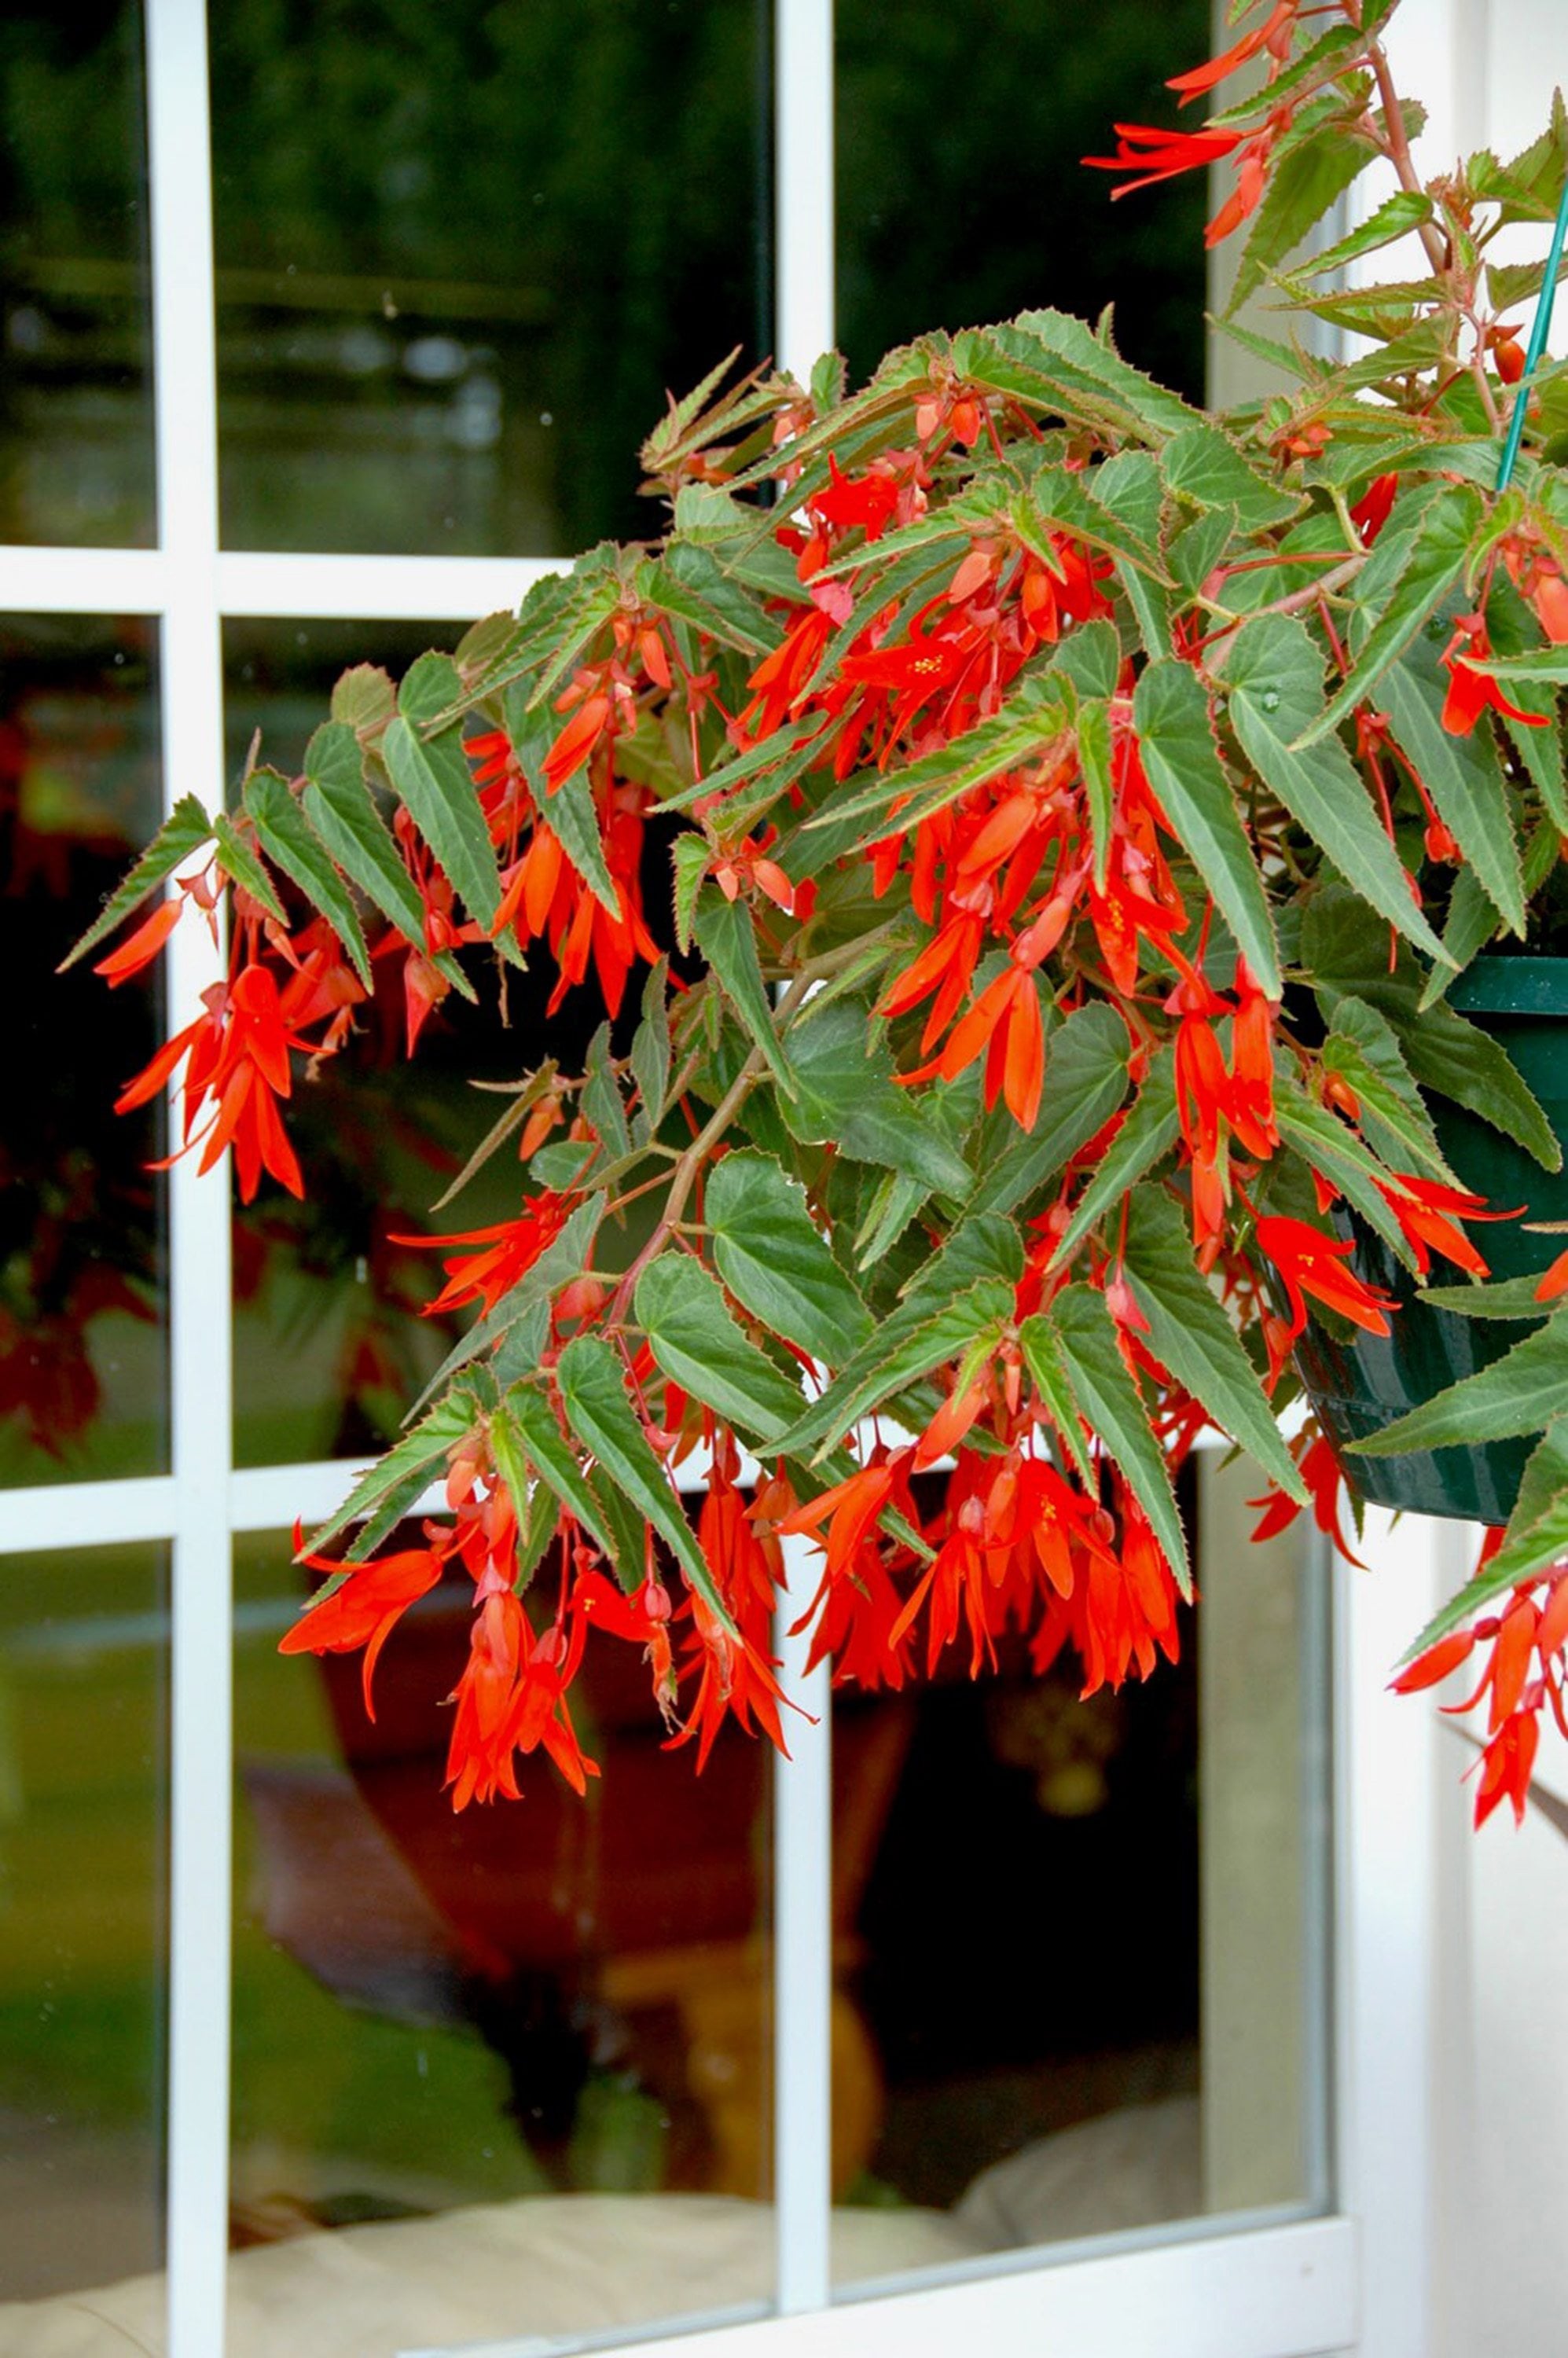 Bonfire begonia flowers hang downward out of baskets and will bring in hummingbirds to feed.